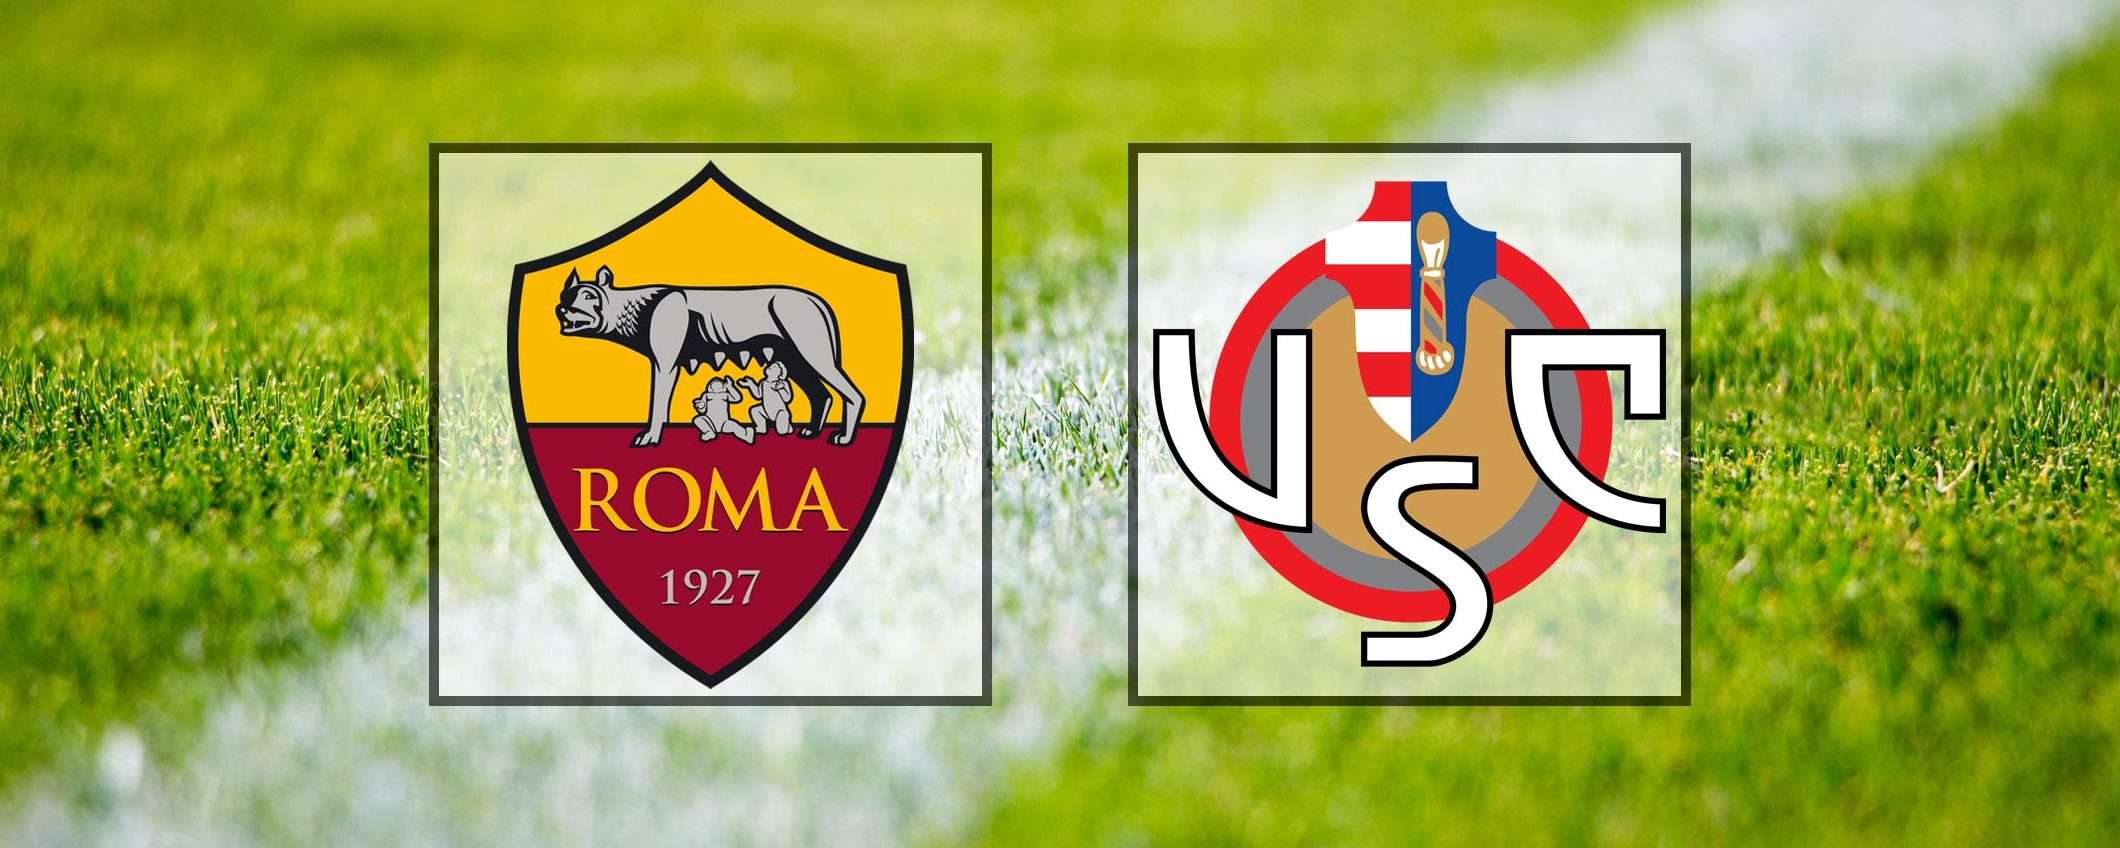 Roma-Cremonese (Serie A): guardala in streaming